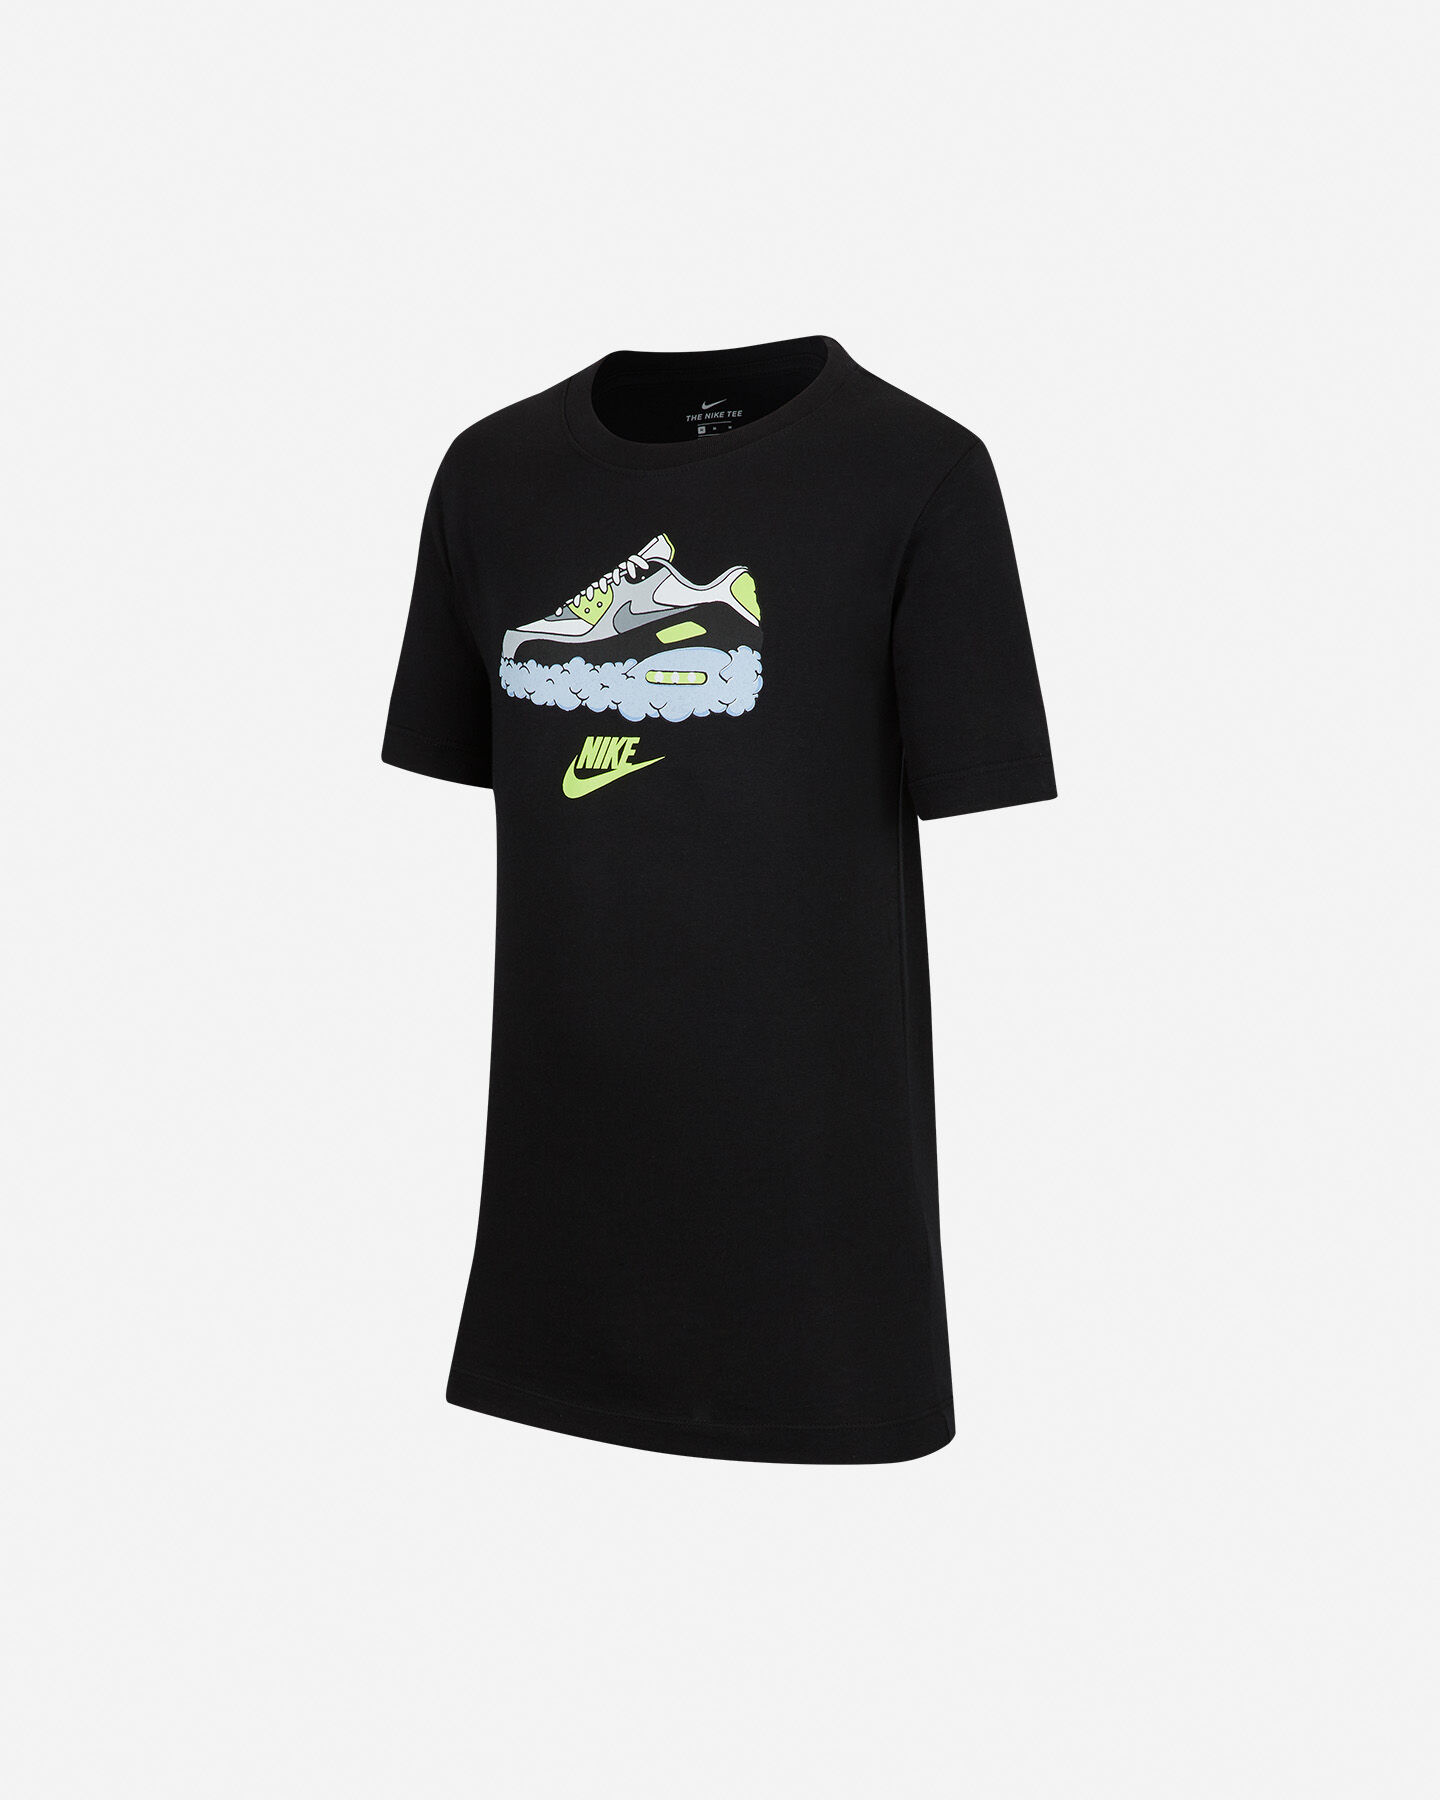  T-Shirt NIKE JRSY JR S5165061|010|S scatto 0